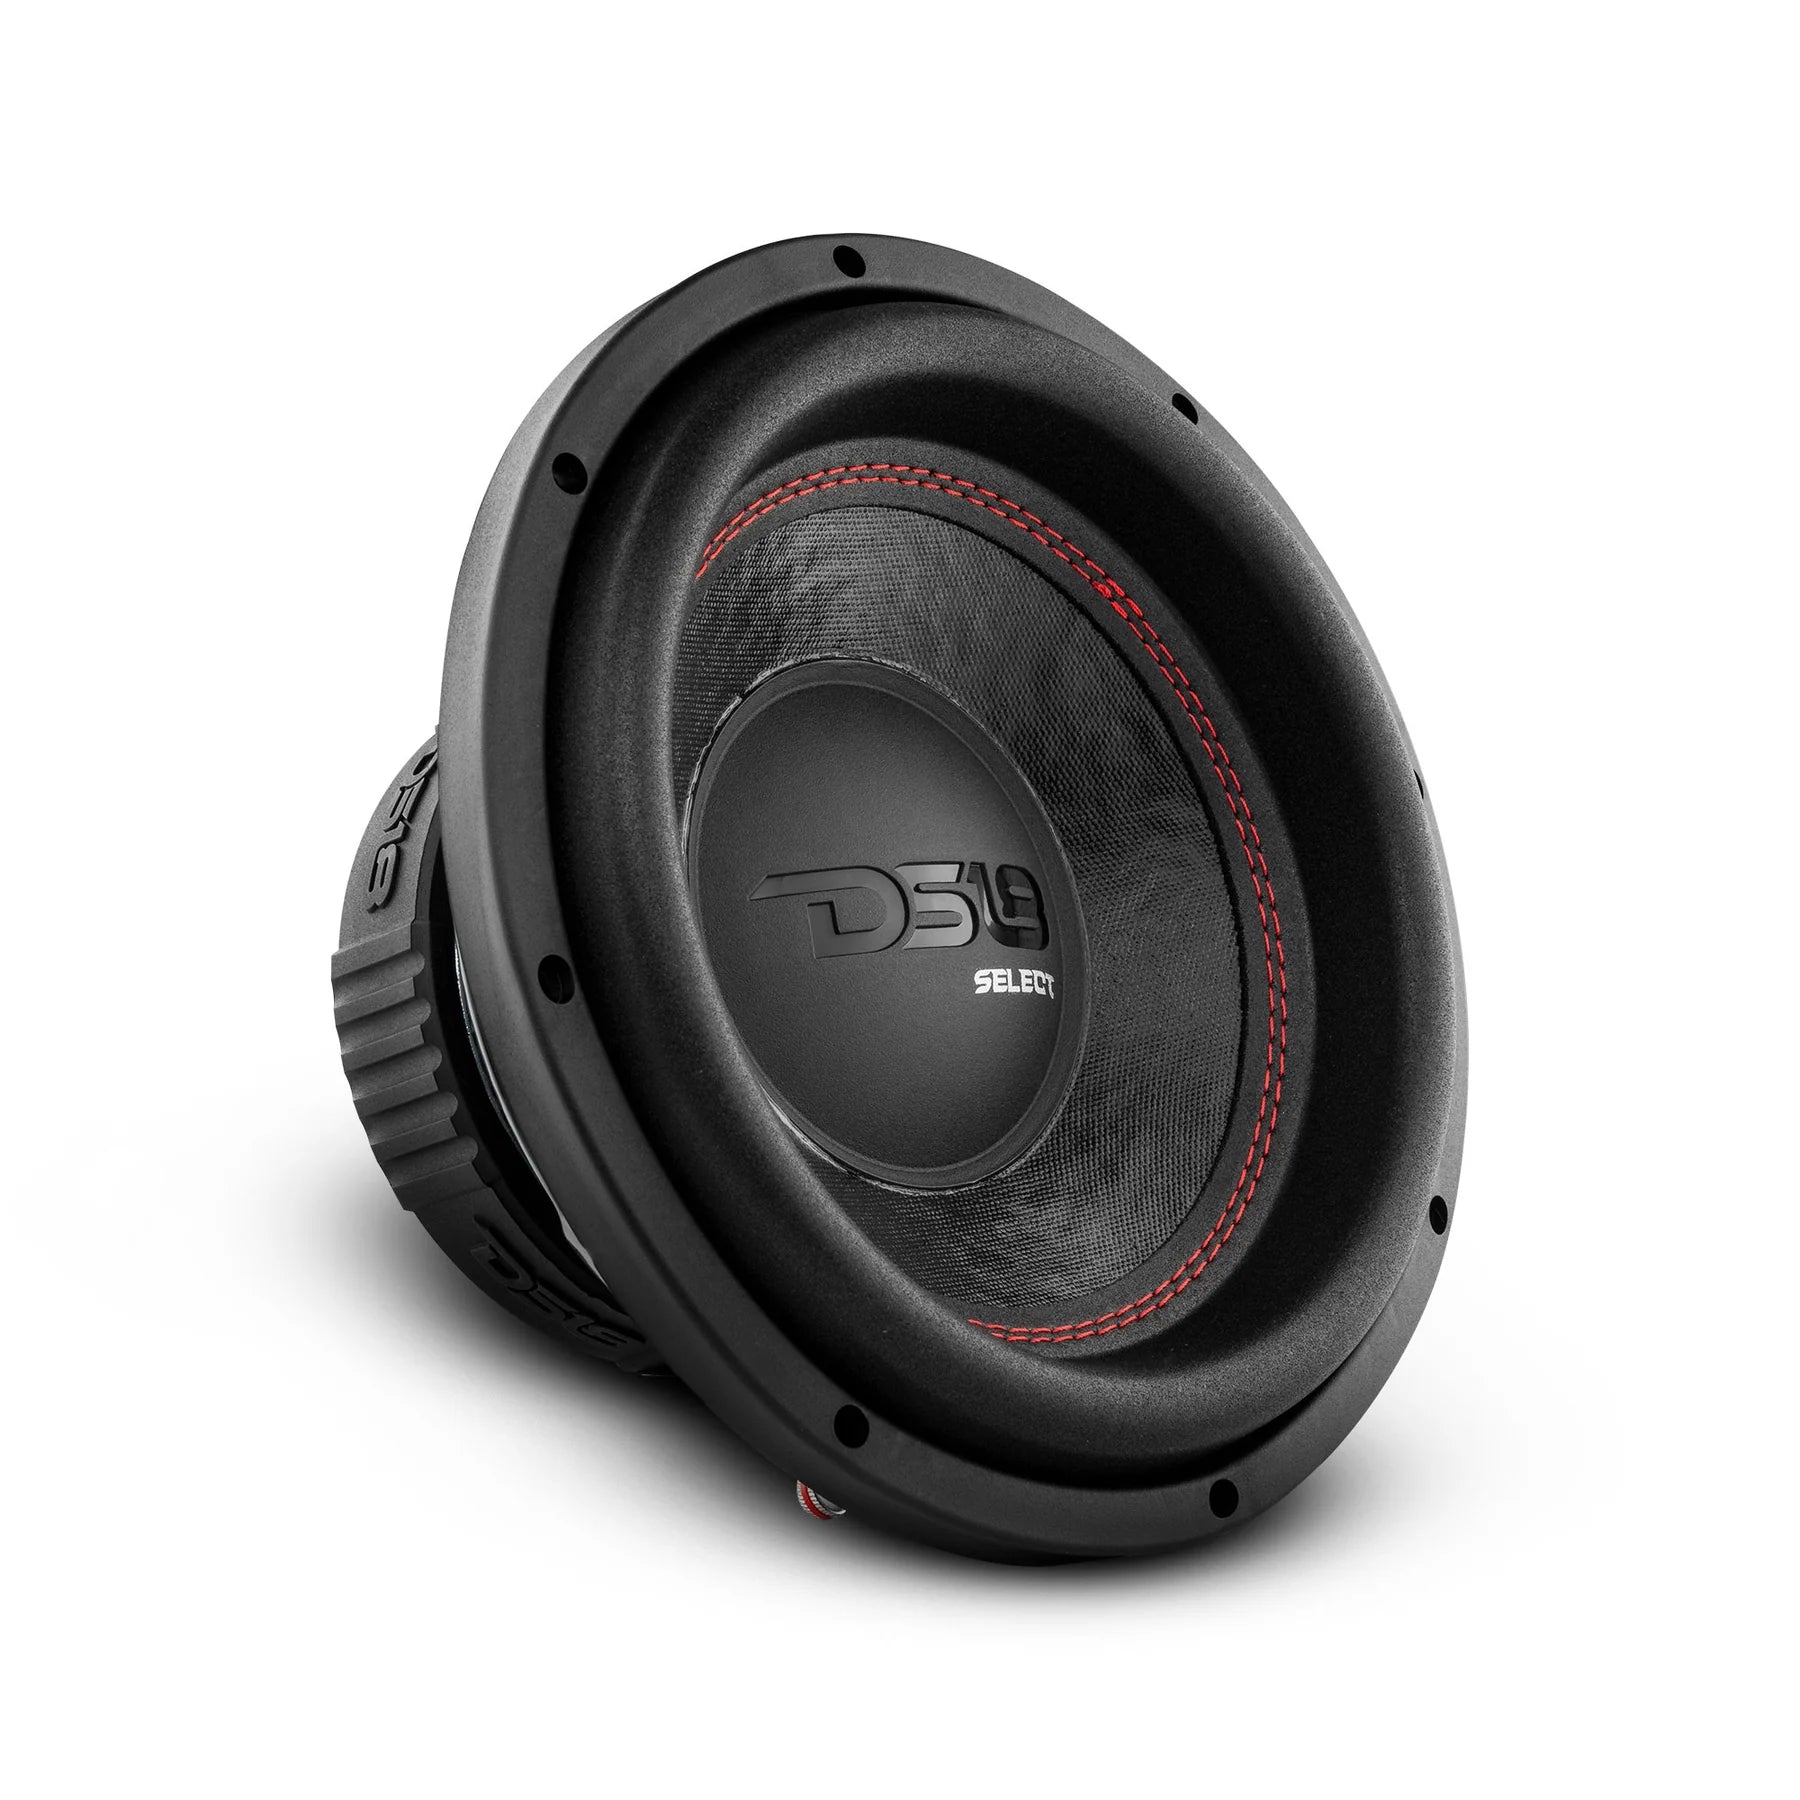 DS18 SLC10S 10" Select Car Subwoofer 440 Watts 4-Ohm SVC